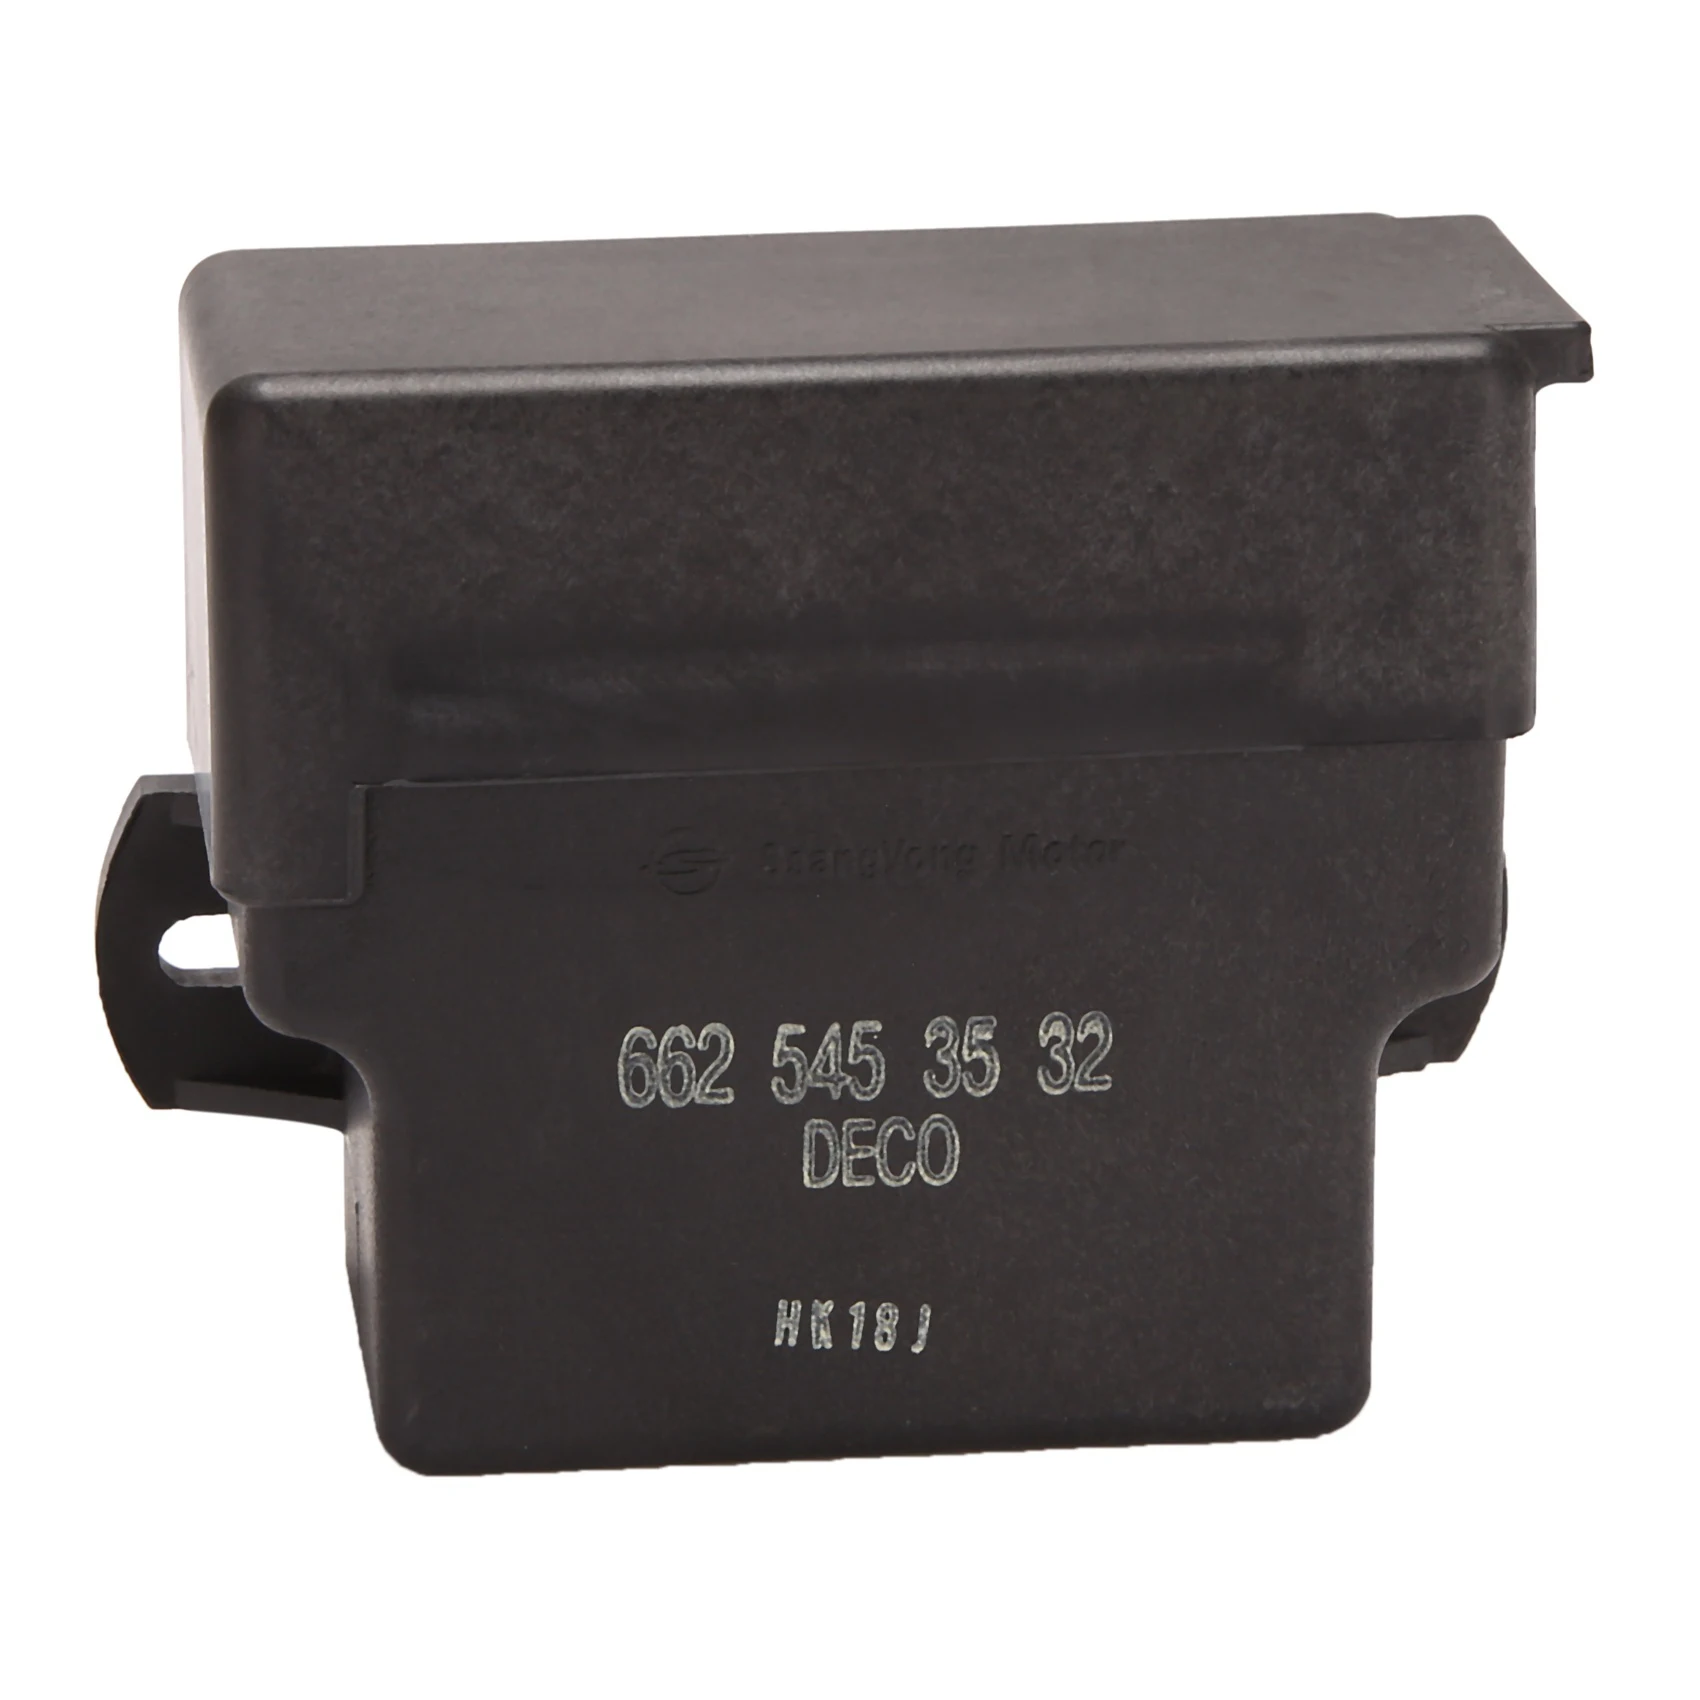 

Car Preheating Time Relay for Ssangyong Musso Korando Rexton 6625453532 Preheating Relay 5 Cylinder